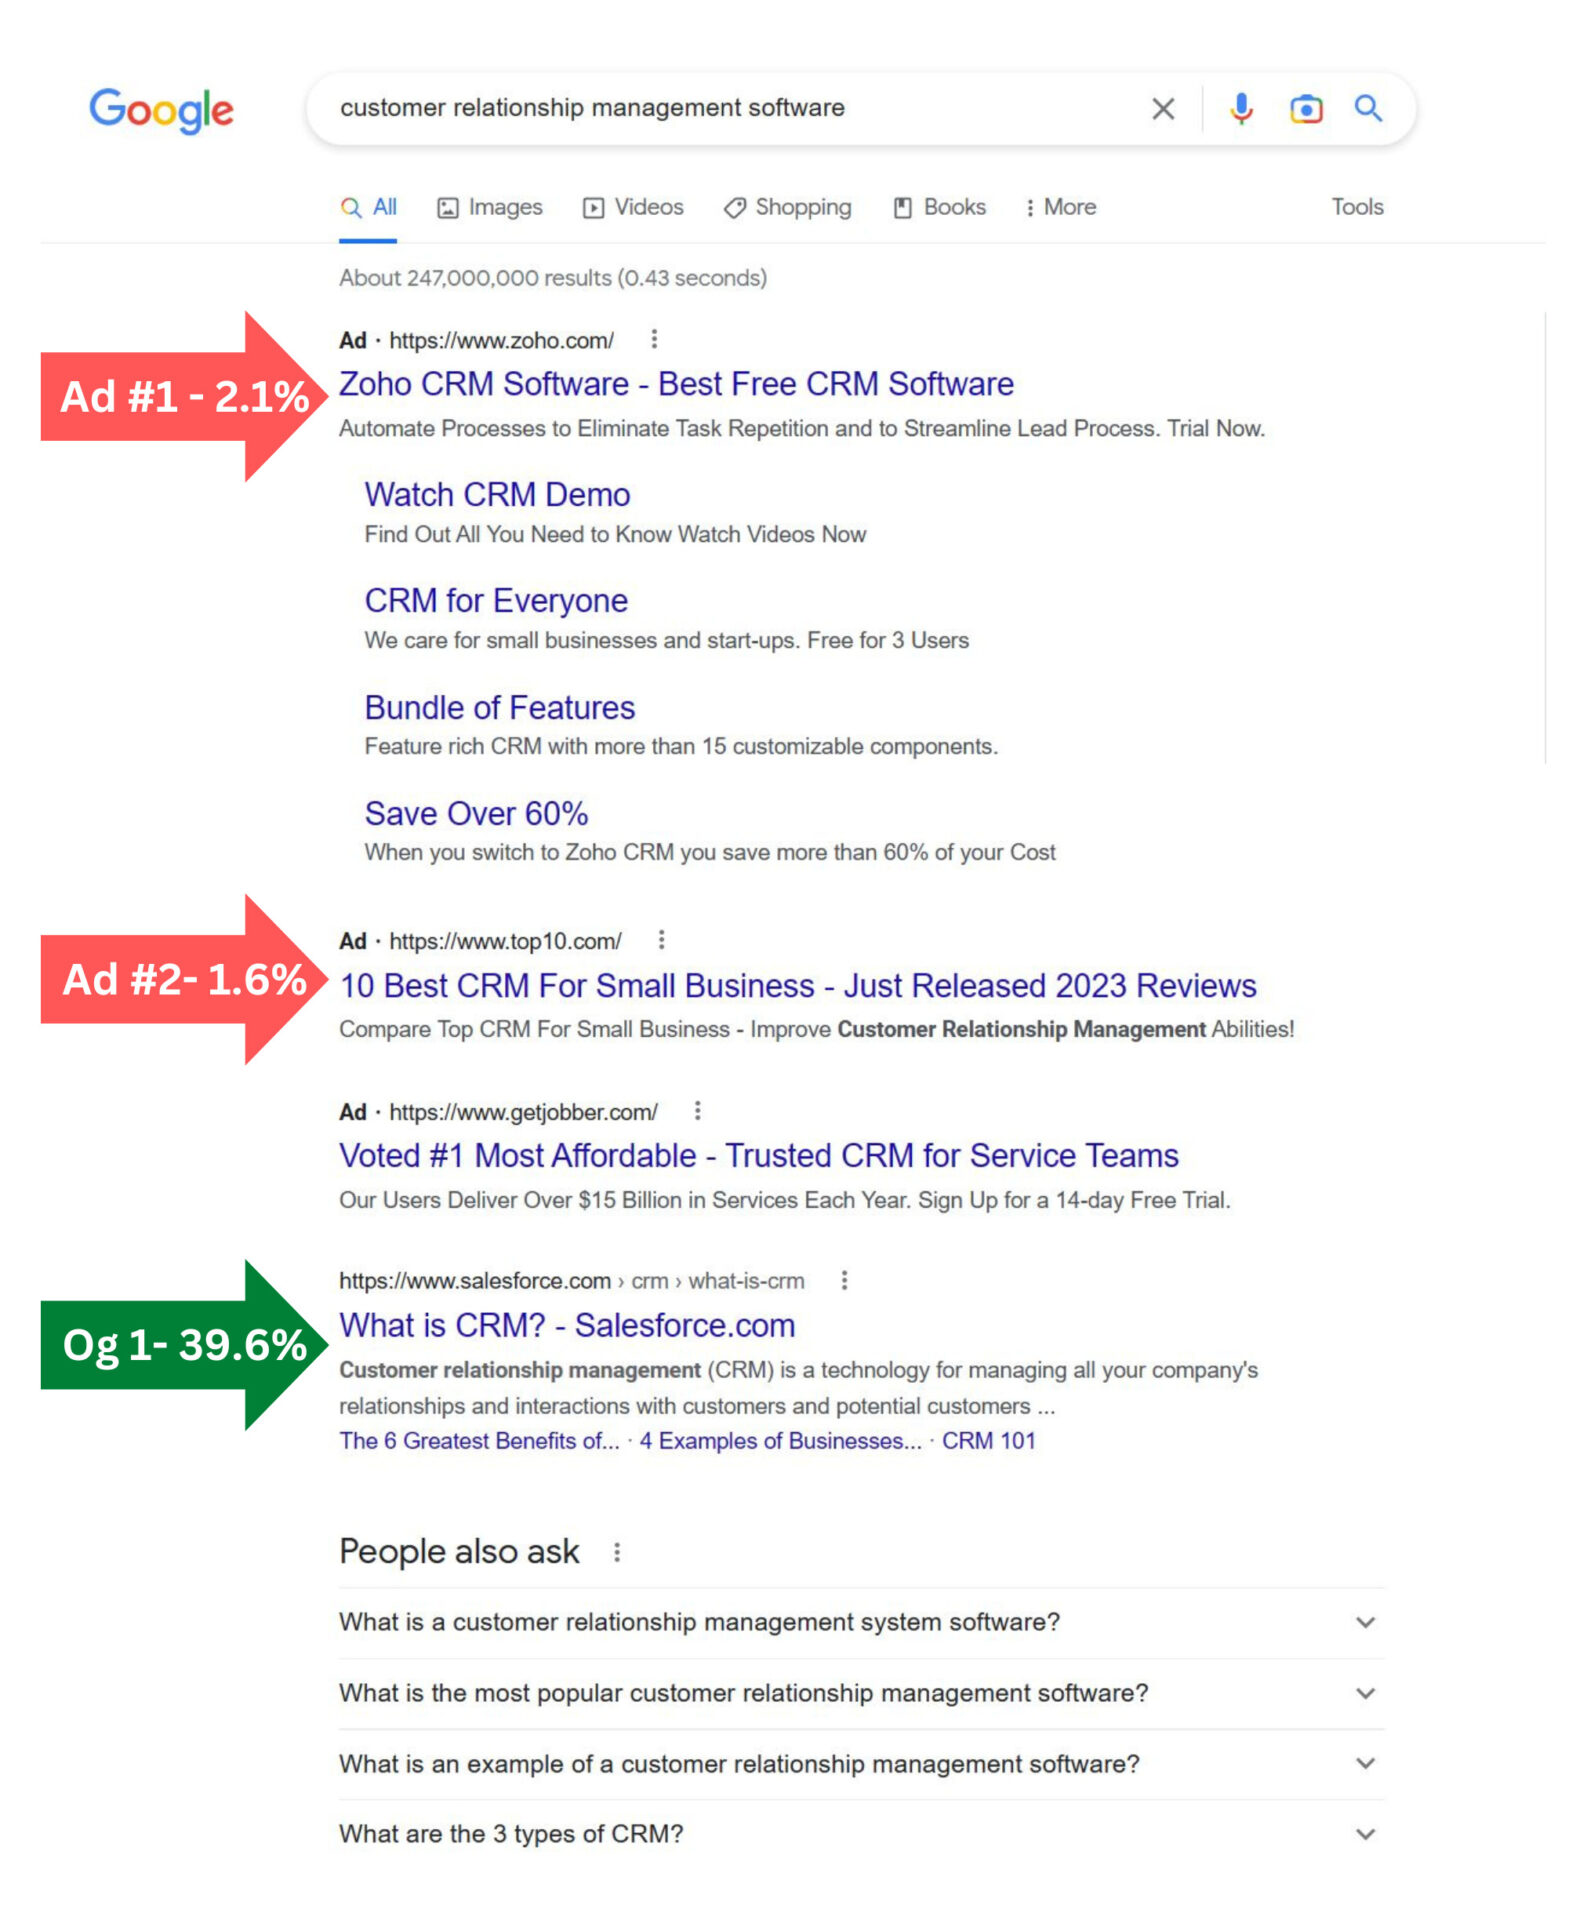 Google search results for a customer relationship manager software, showing the percentages of clicks on ads and organic results.